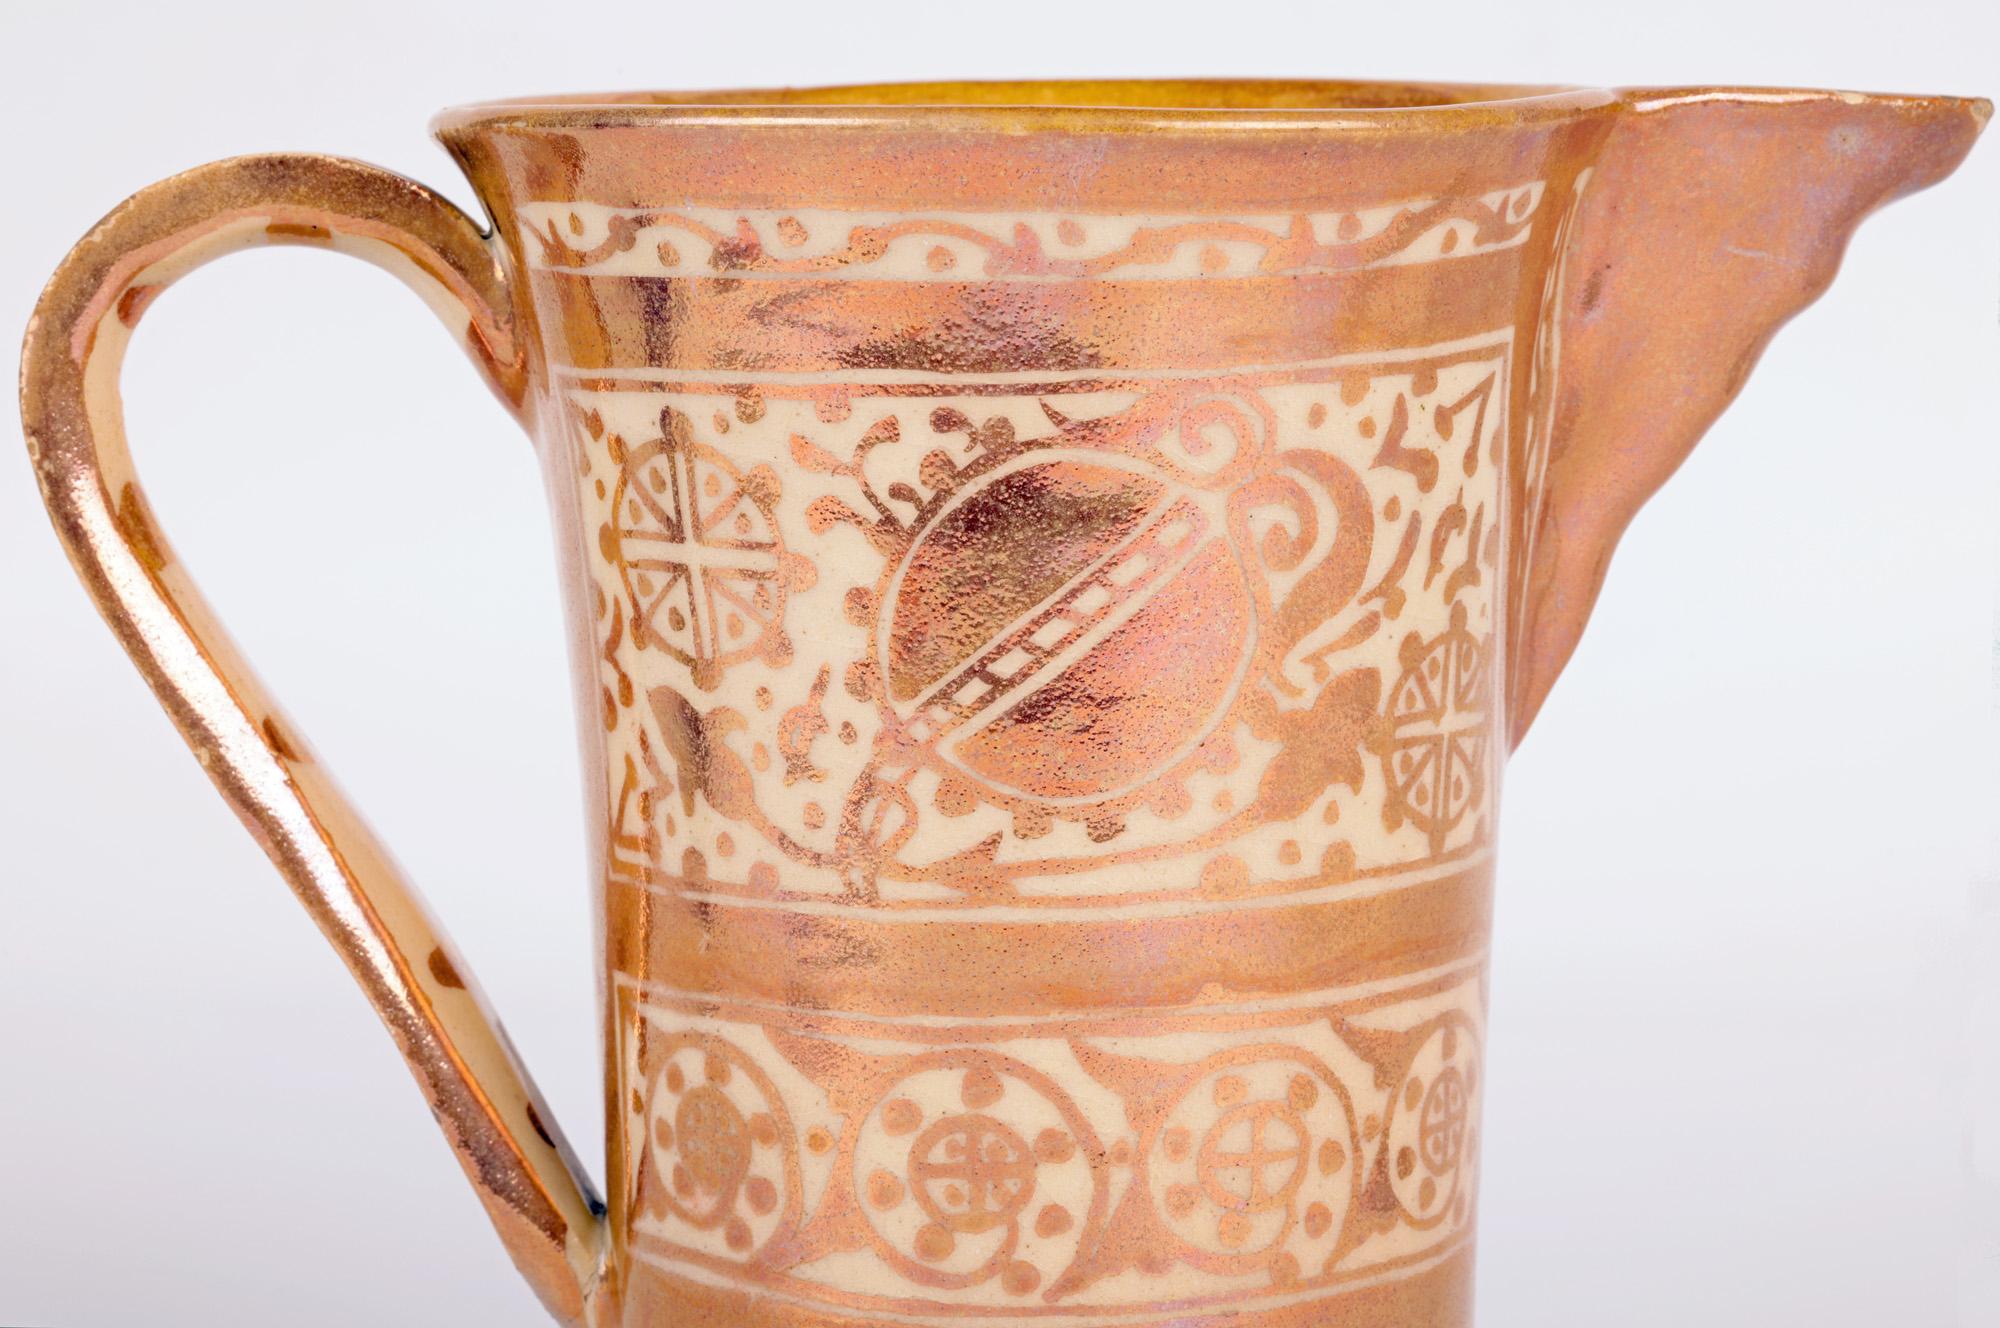 A very stylish Hispano-Moresque or Moorish influence copper lustre glazed art pottery jug dating from the 19th century. 

Hispano-Moresque as the name suggests originated from Southern Spain when under the occupation of the Moors. The decorative